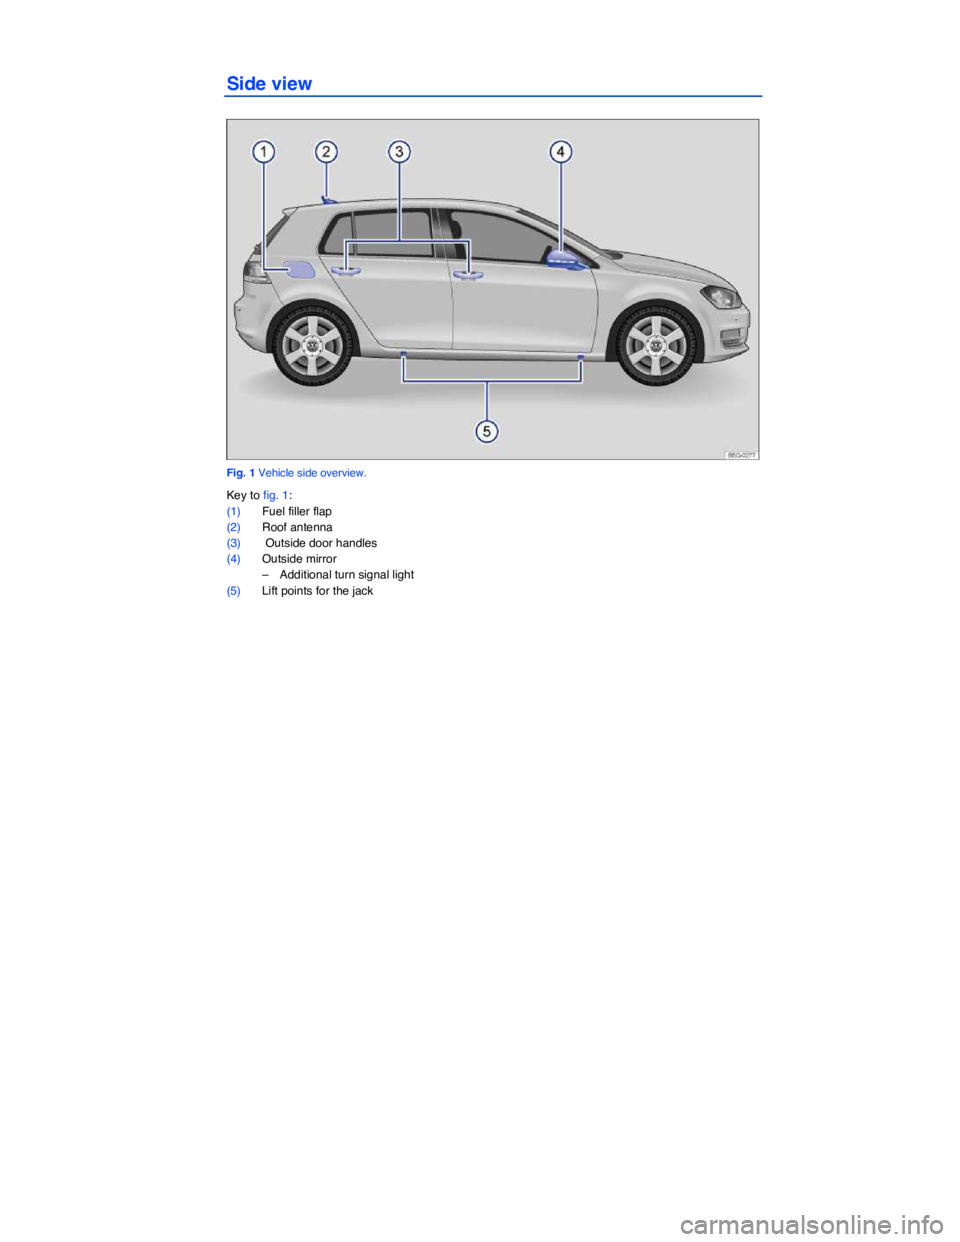 VOLKSWAGEN SCIROCCO 2017  Owners Manual   
Side view 
 
Fig. 1 Vehicle side overview. 
Key to fig. 1: 
(1) Fuel filler flap 
(2) Roof antenna  
(3)  Outside door handles  
(4) Outside mirror  
–  Additional turn signal light  
(5) Lift po